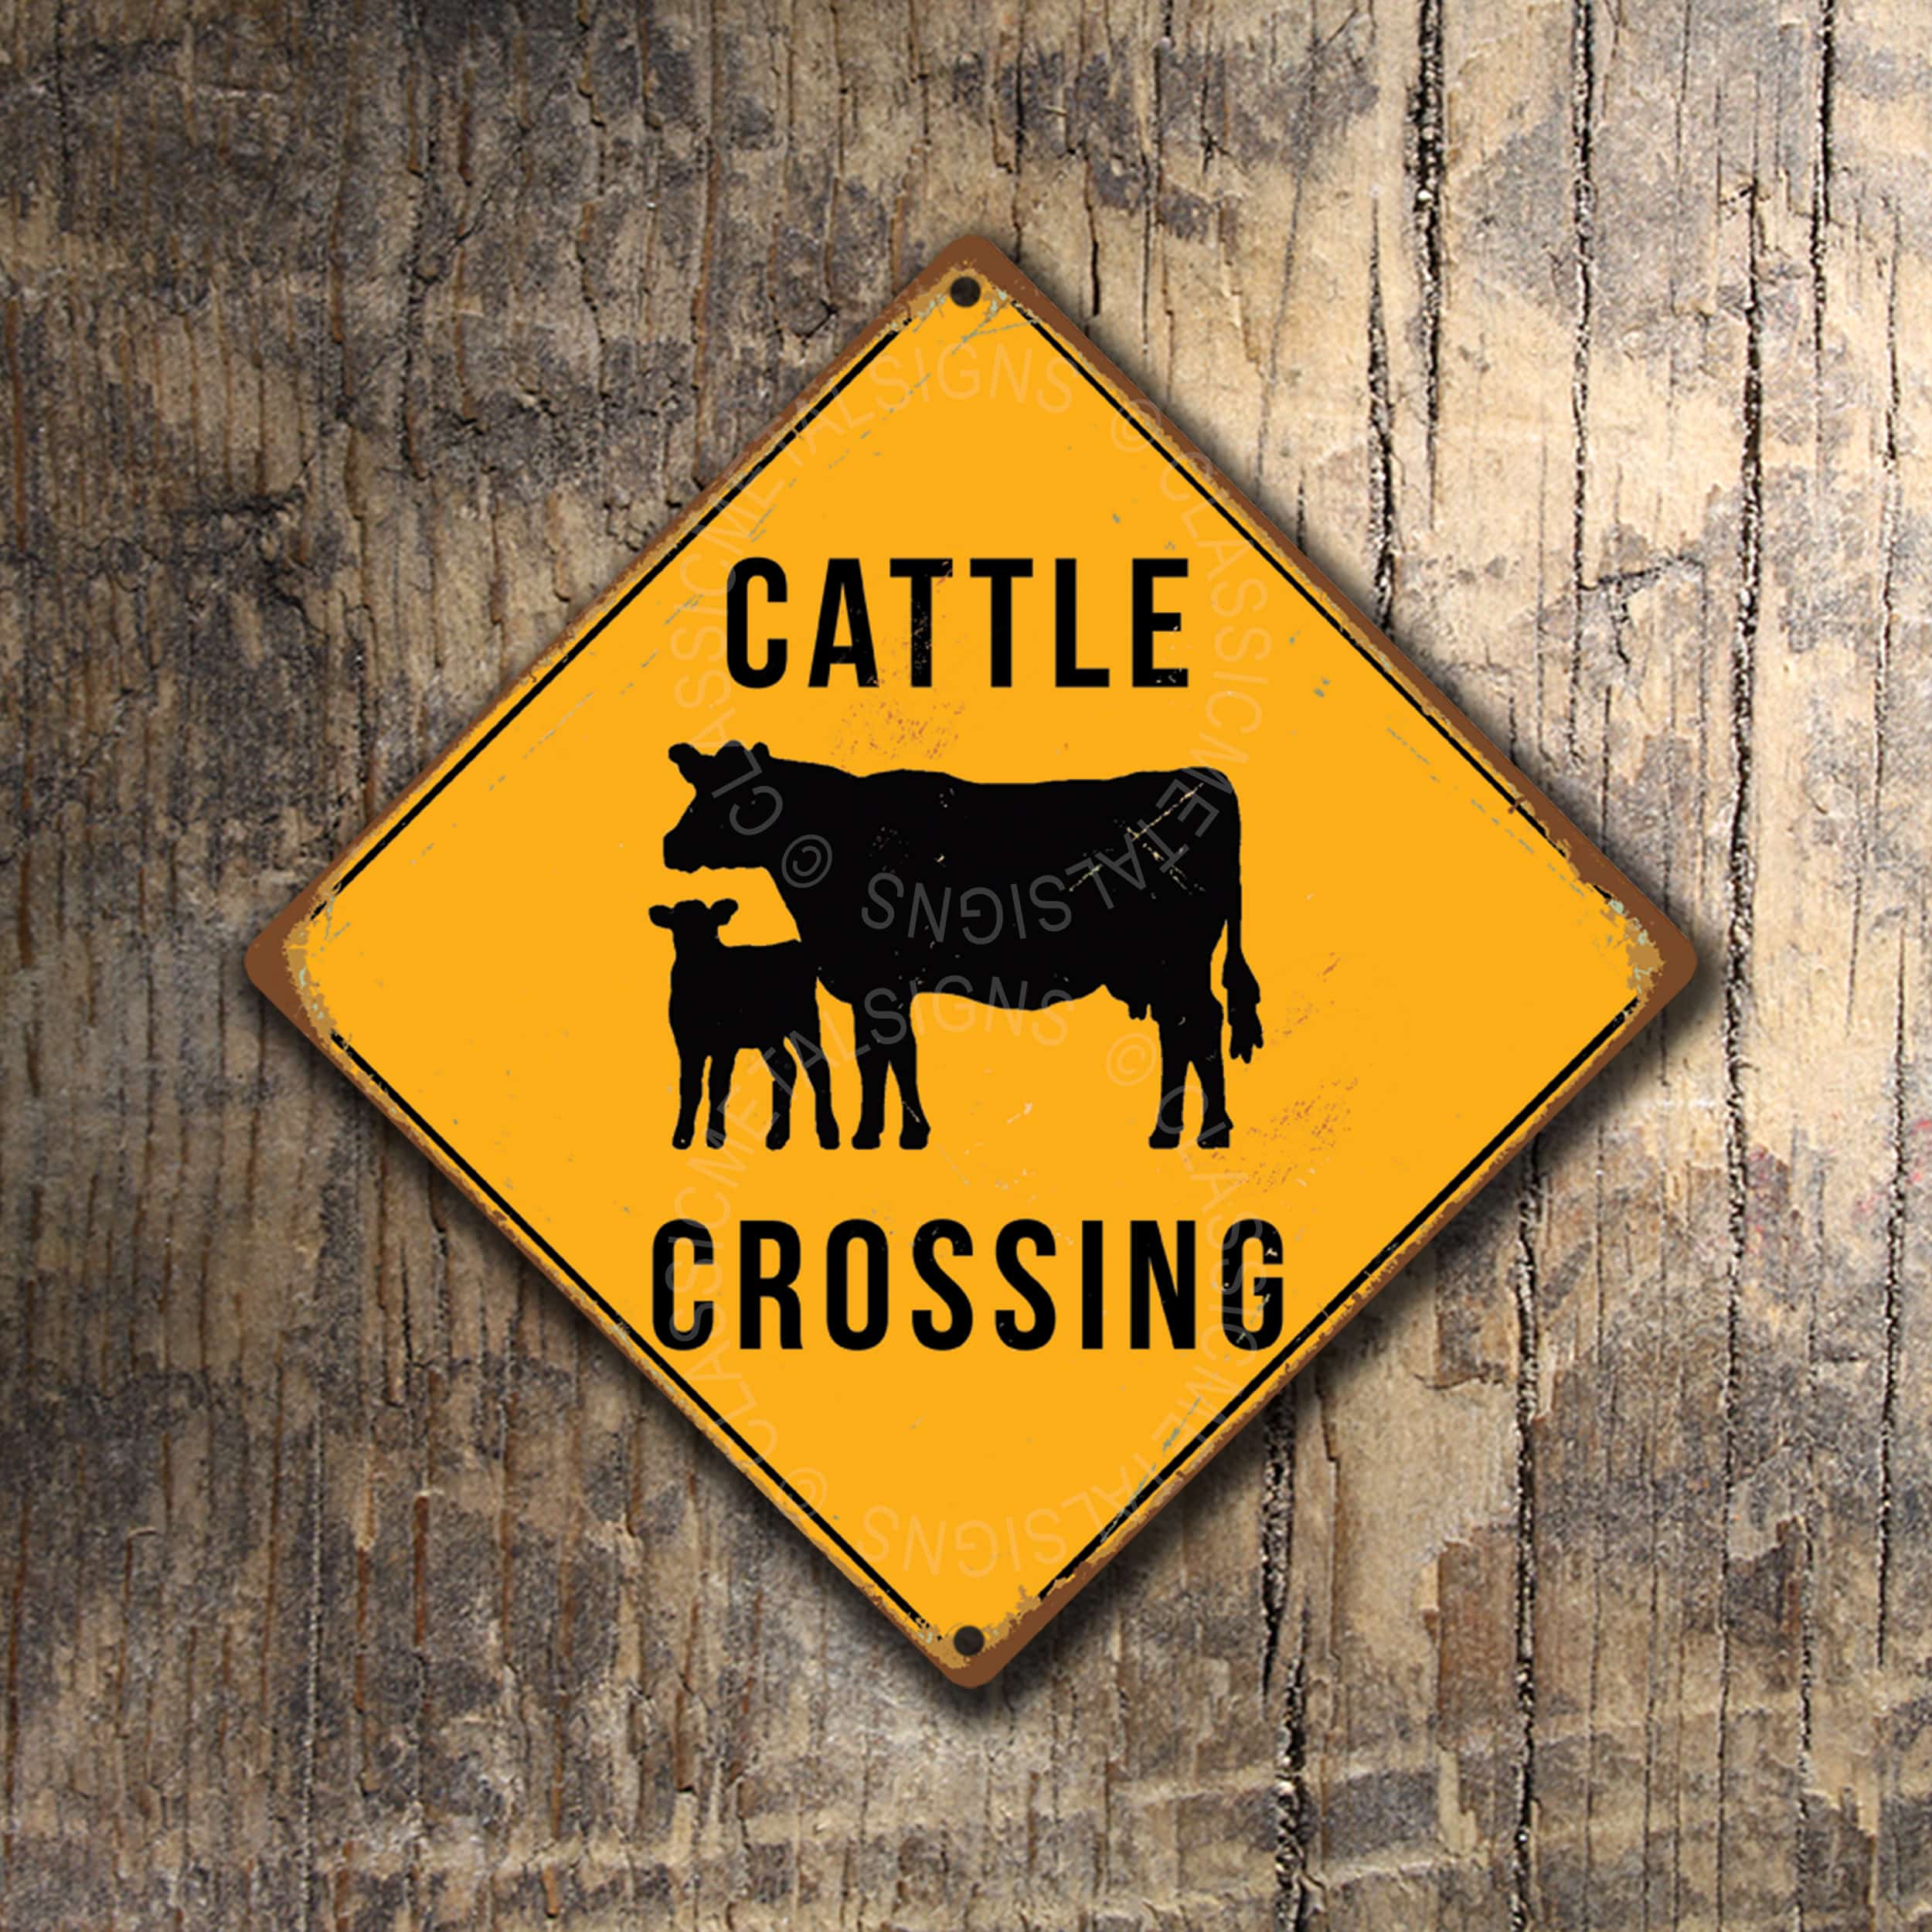 Cattle Crossing Signs